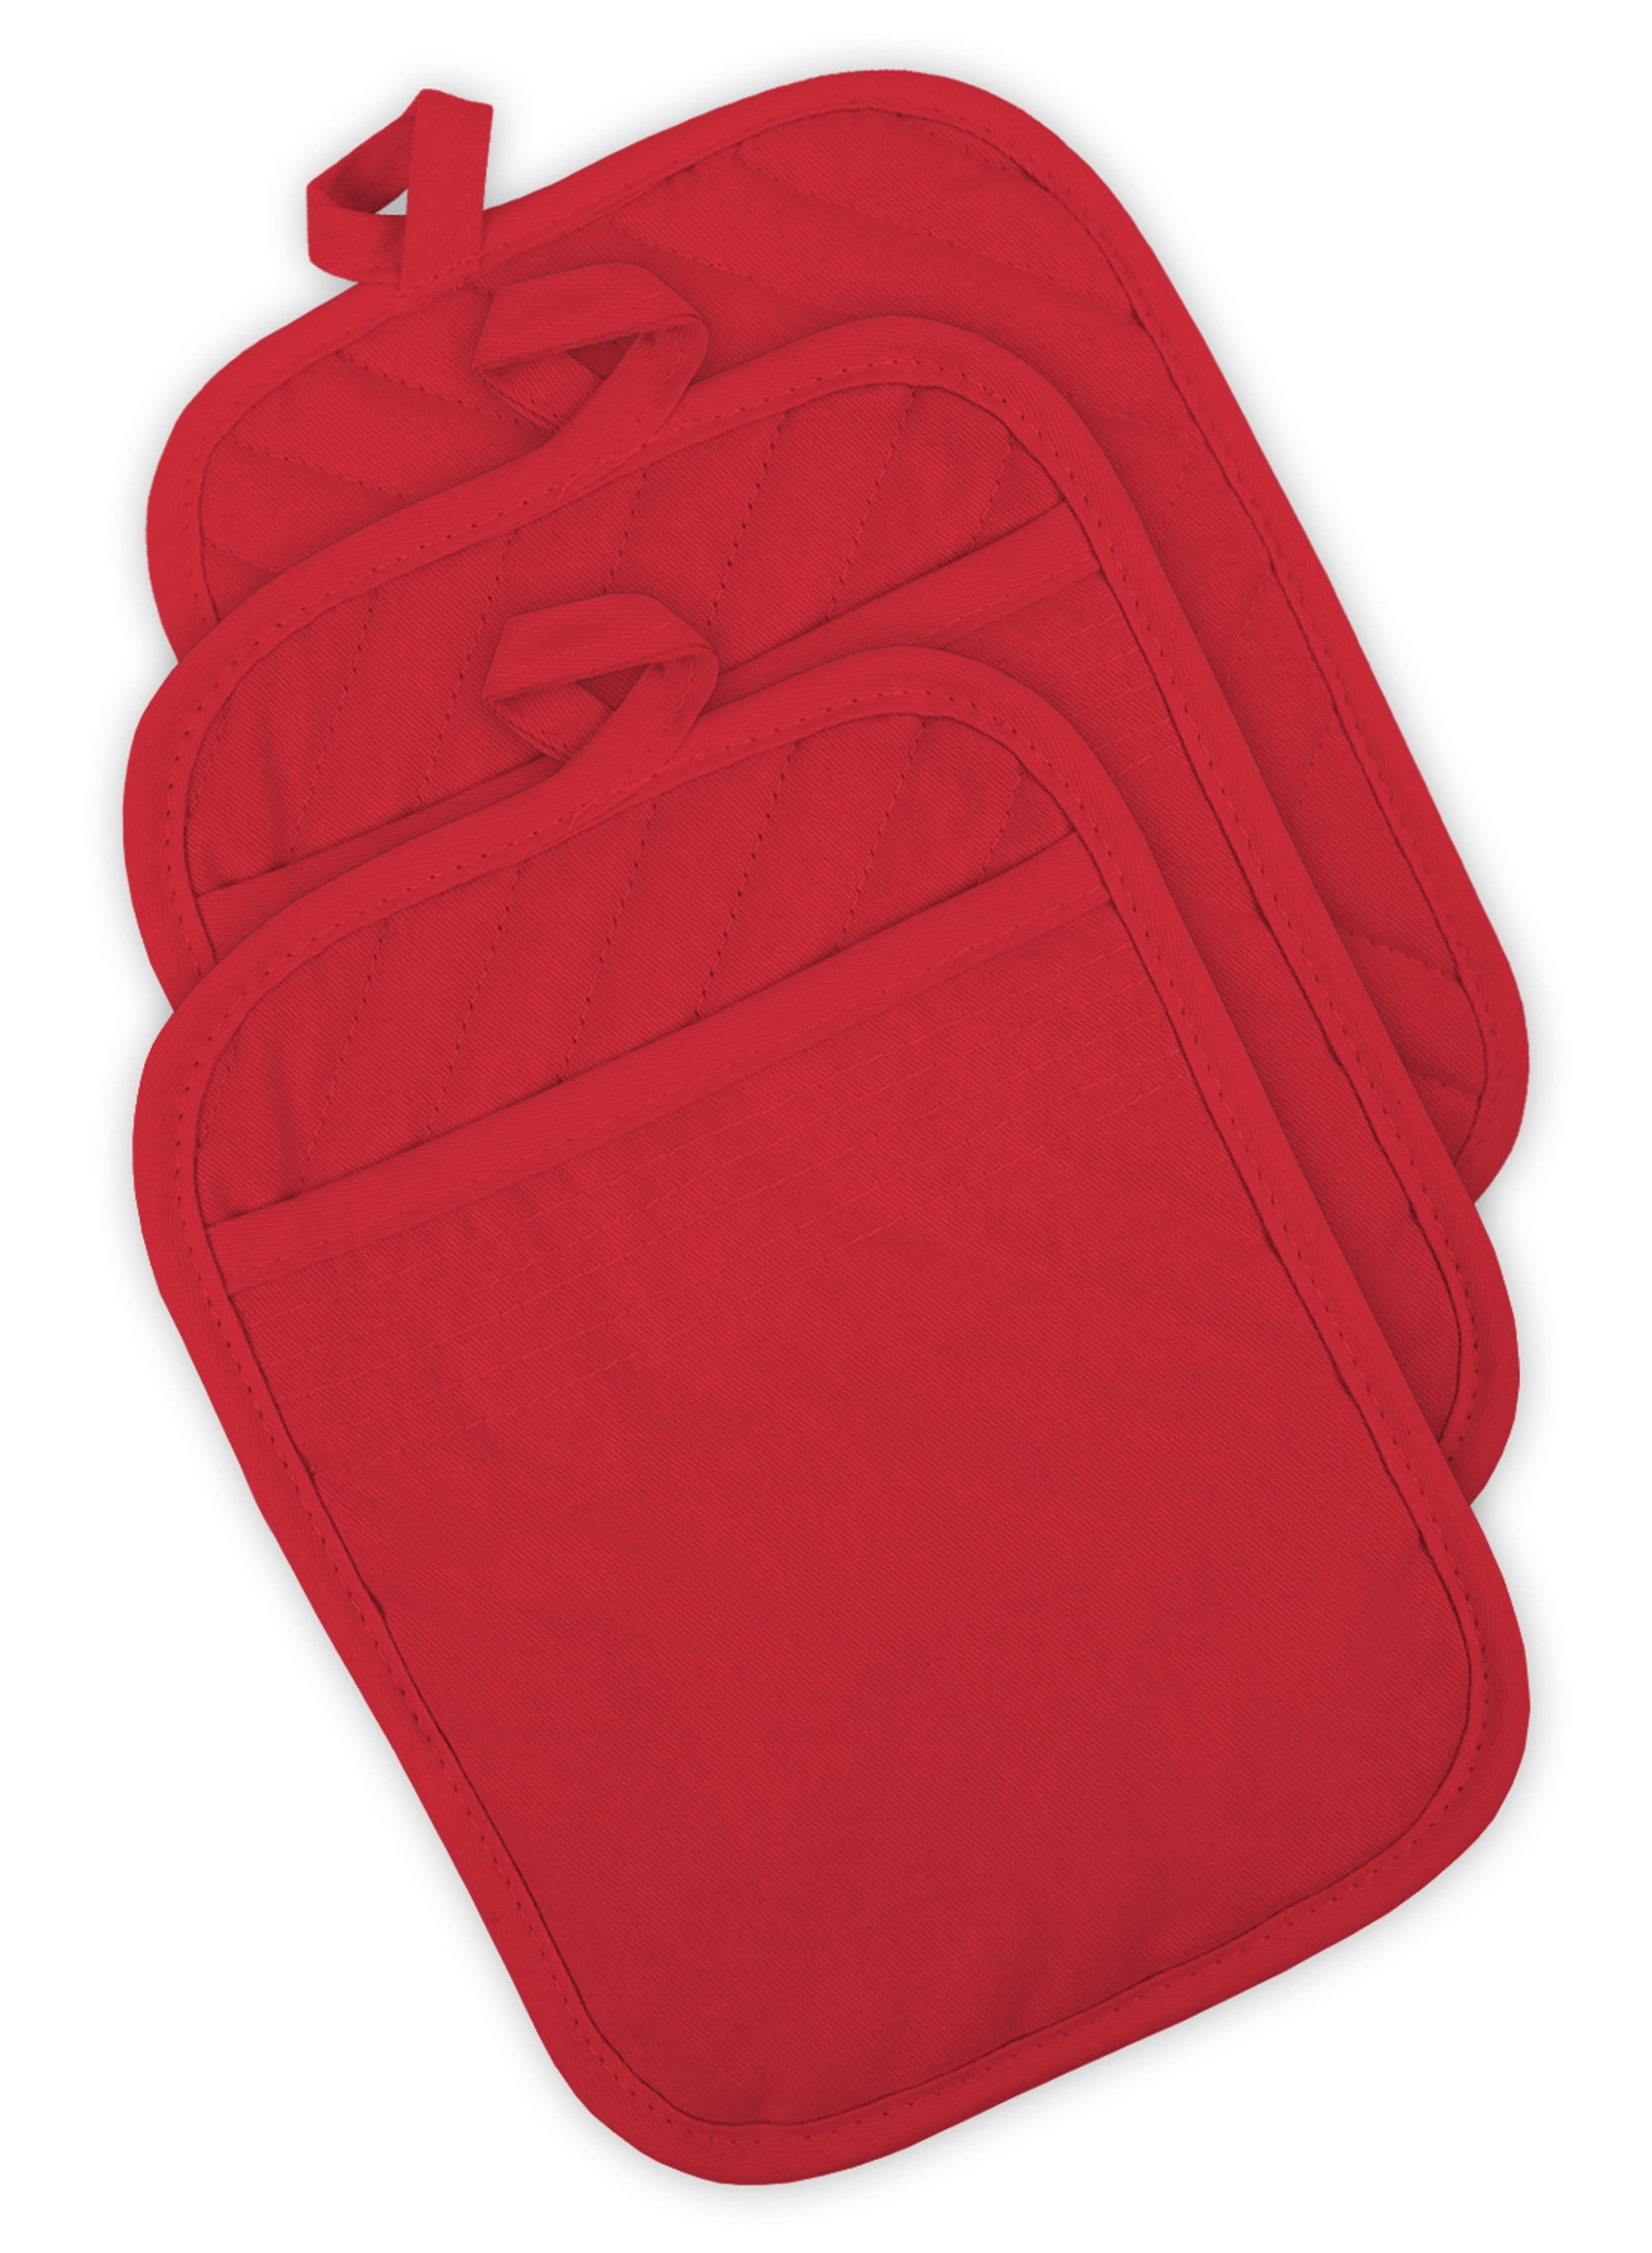 DII Red Terry Potholder (Set of 3) - Heat Resistant Cloth Pot Holders -  7x7-in - Easy Flexibility & Durability - Hanging Loop - by [Manufacturer]  in the Kitchen Towels department at